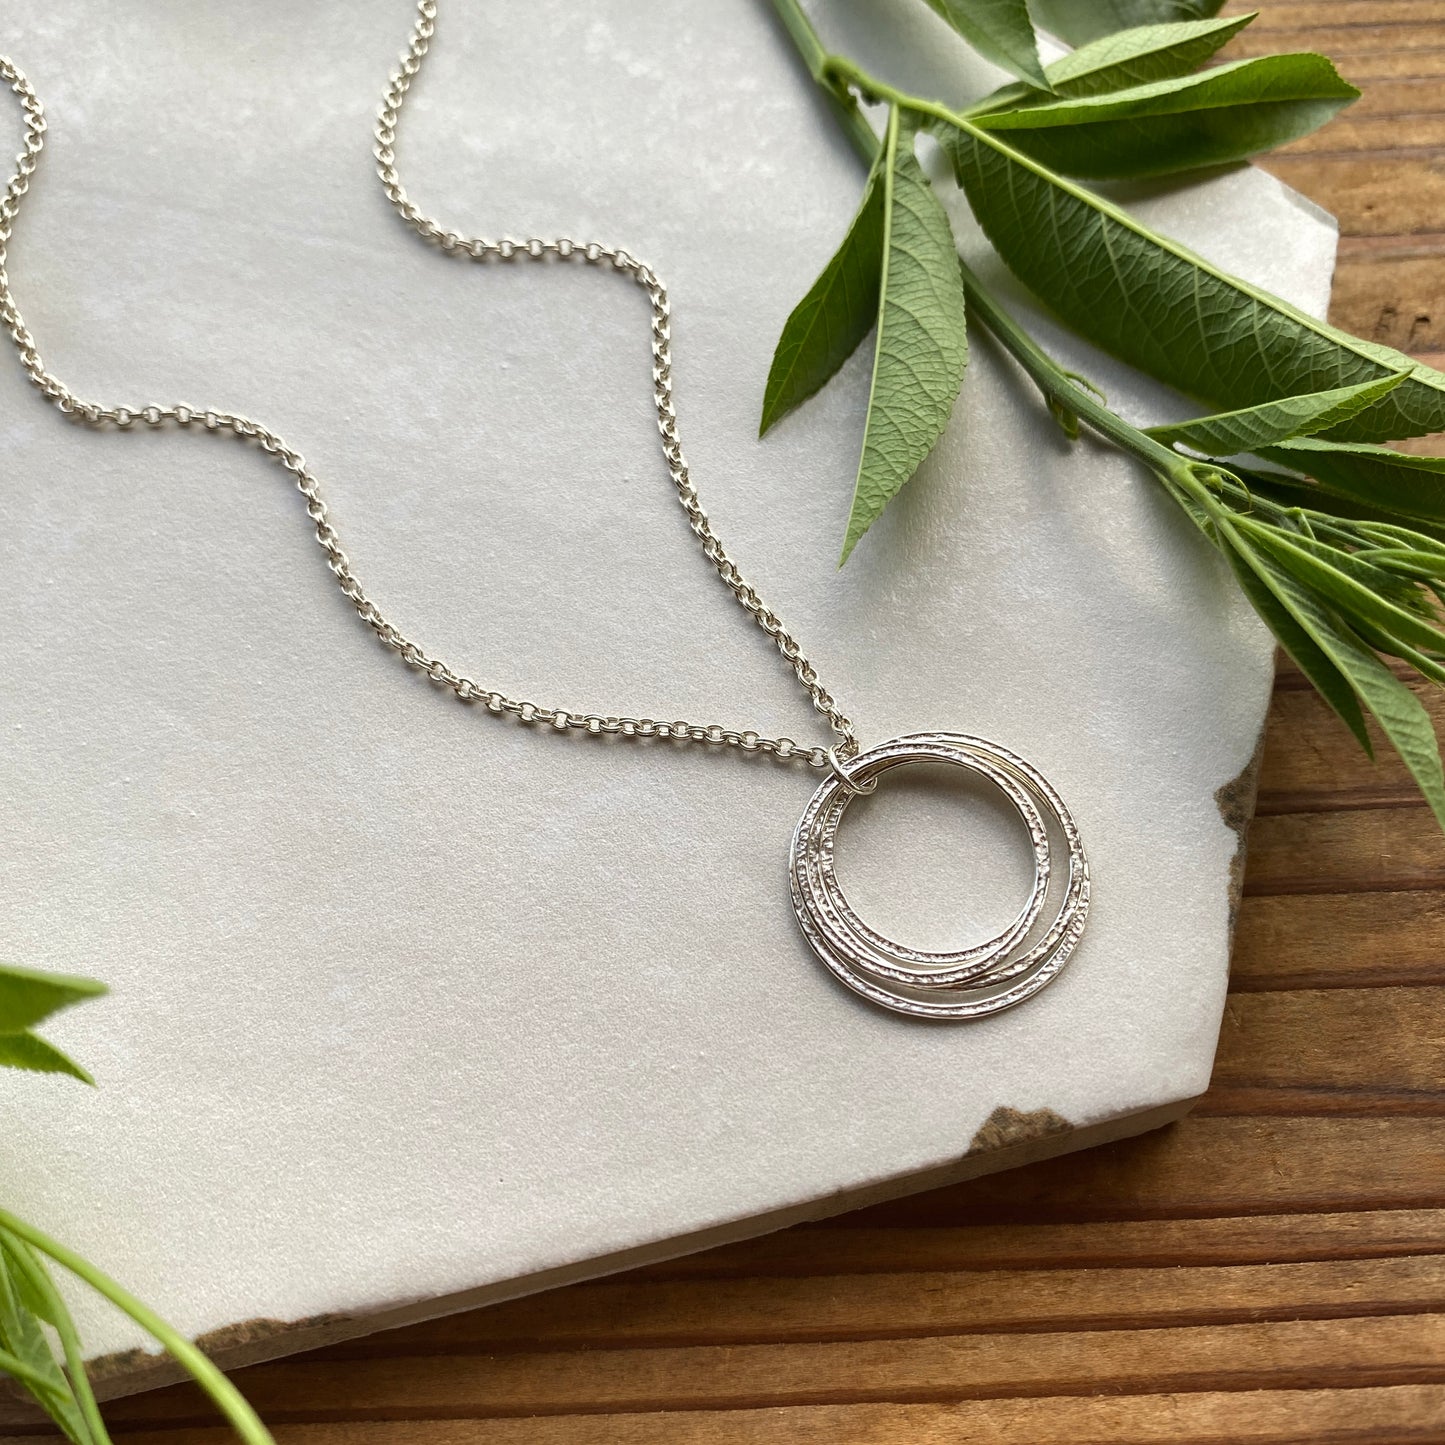 40th Milestone Birthday Necklace, Mid Size Sterling Silver 4 Rings for 4 Decades, Perfectly Imperfect Sparkly Circles Pendant